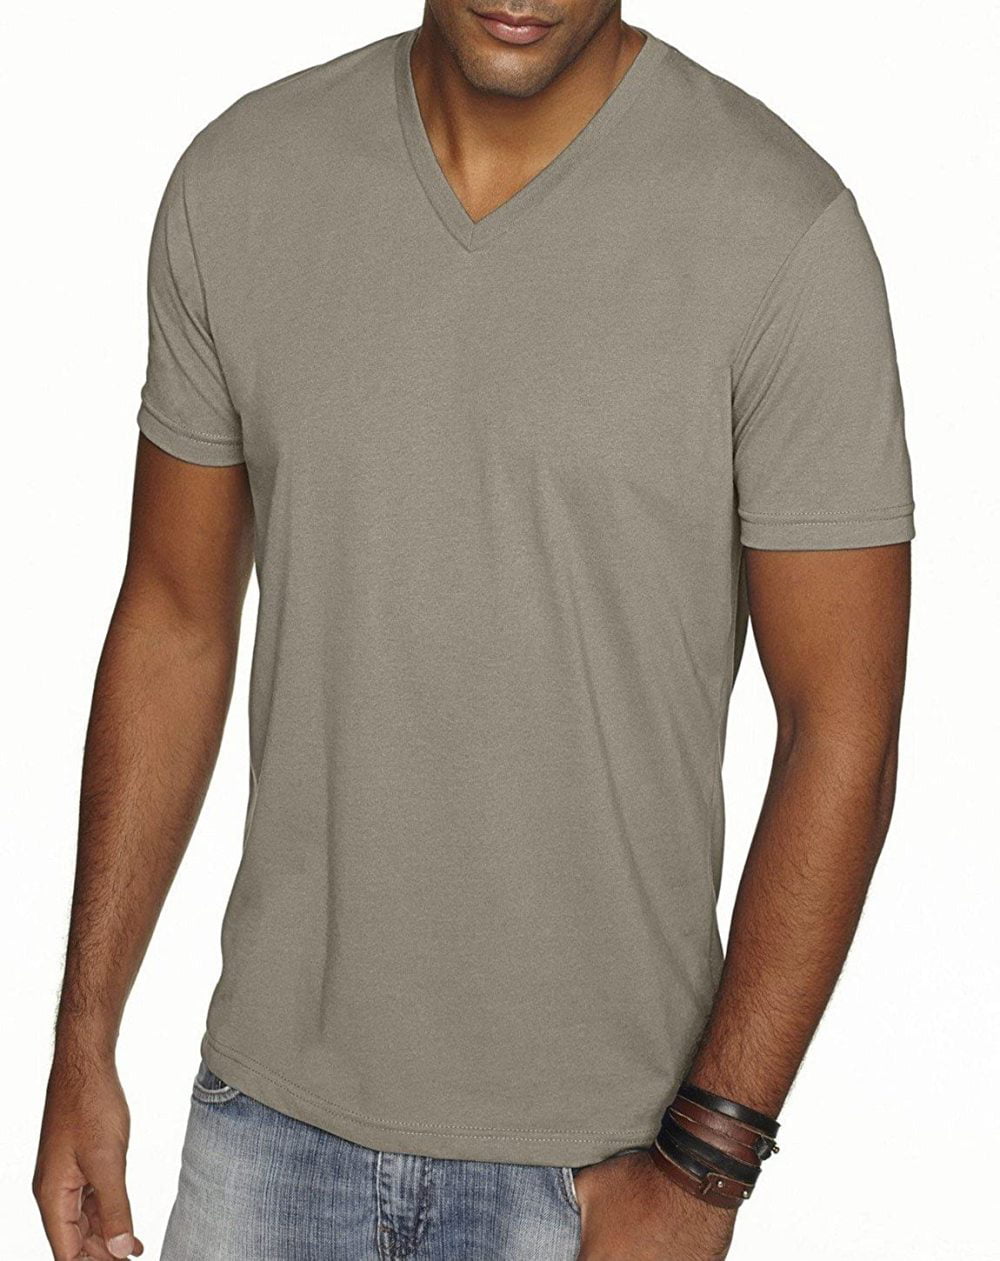 Next Level Apparel 6440 Mens Premium Fitted Sueded V-Neck Tee 2 Pack